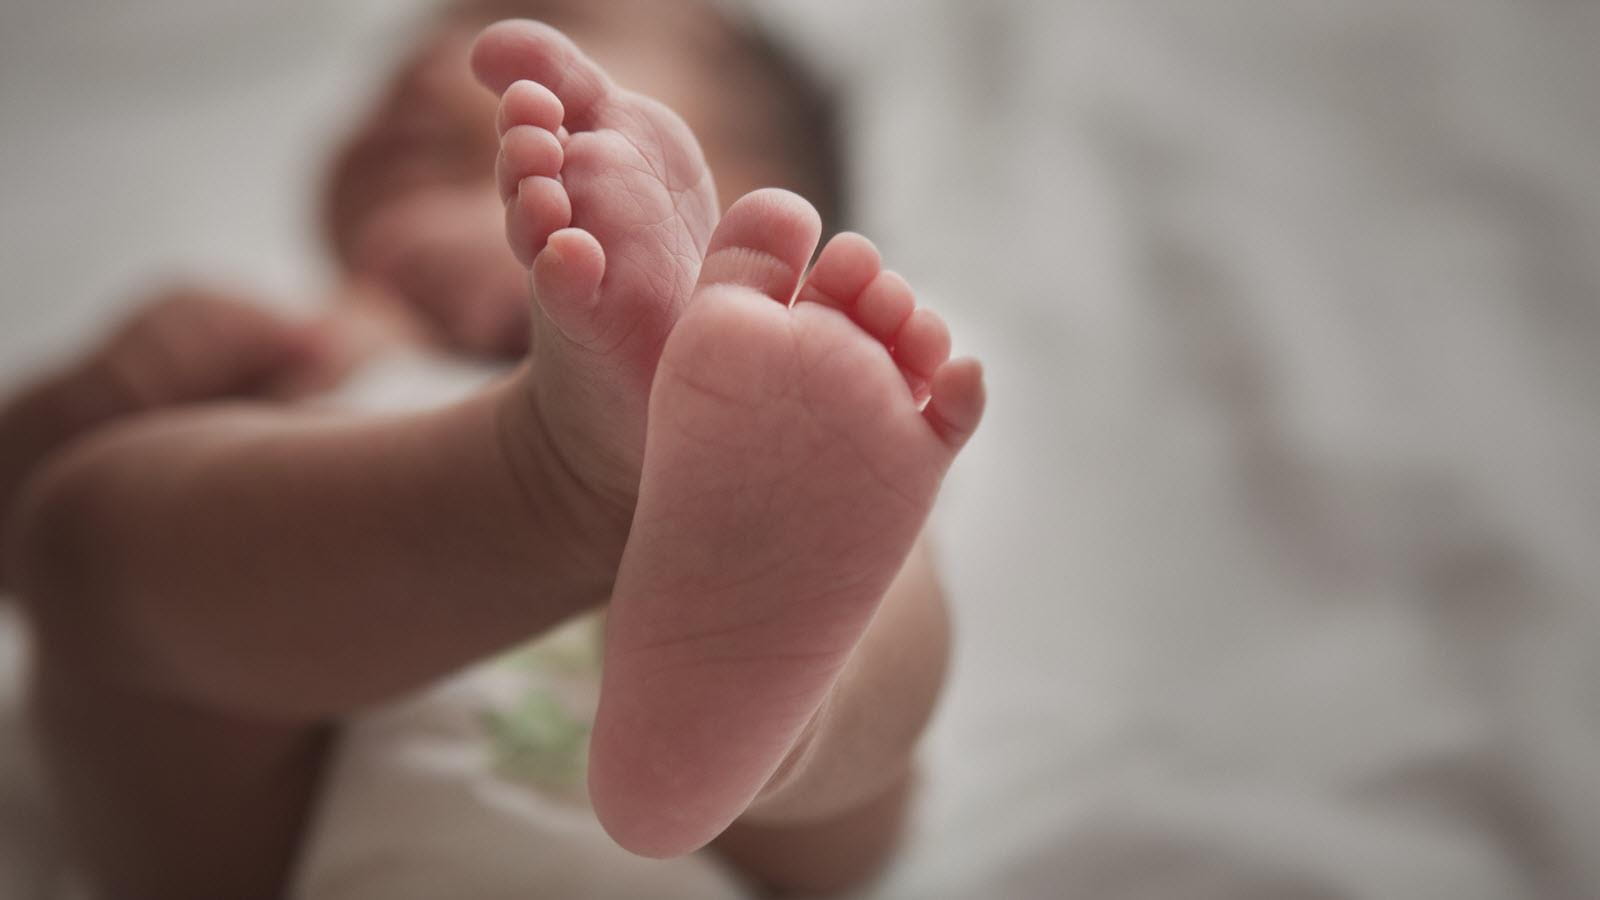 Newborn screening usually involves taking blood samples from a baby's feet to test for serious and rare diseases.